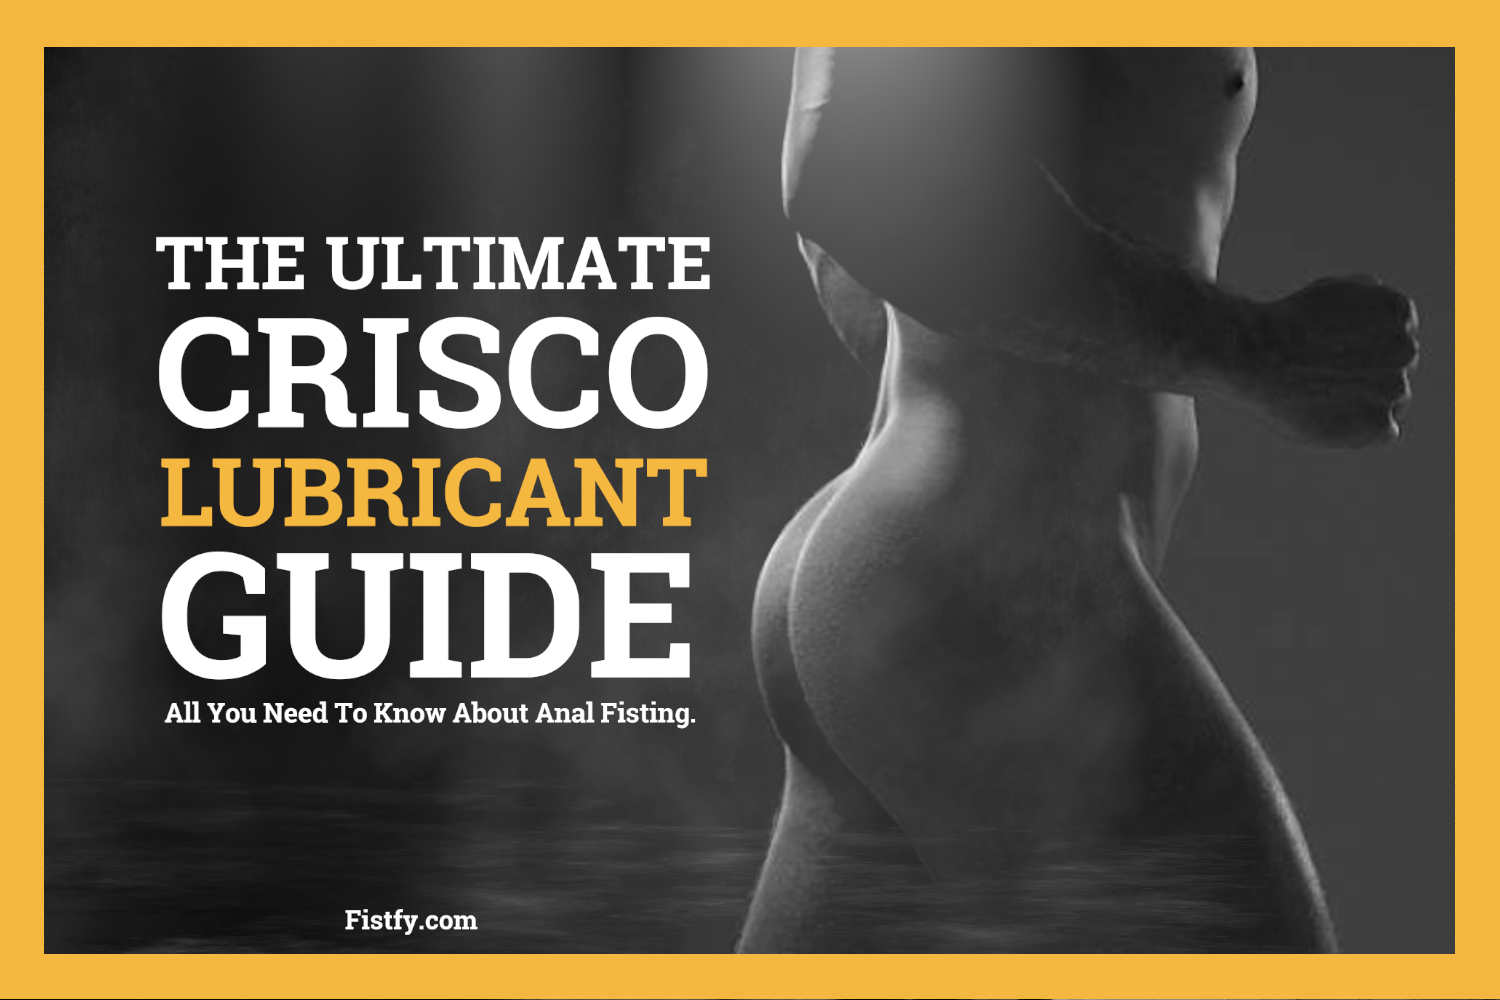 Crisco is lubricant for Anal Sex. Fistfy.com - All You Need To Know About Anal Fisting.